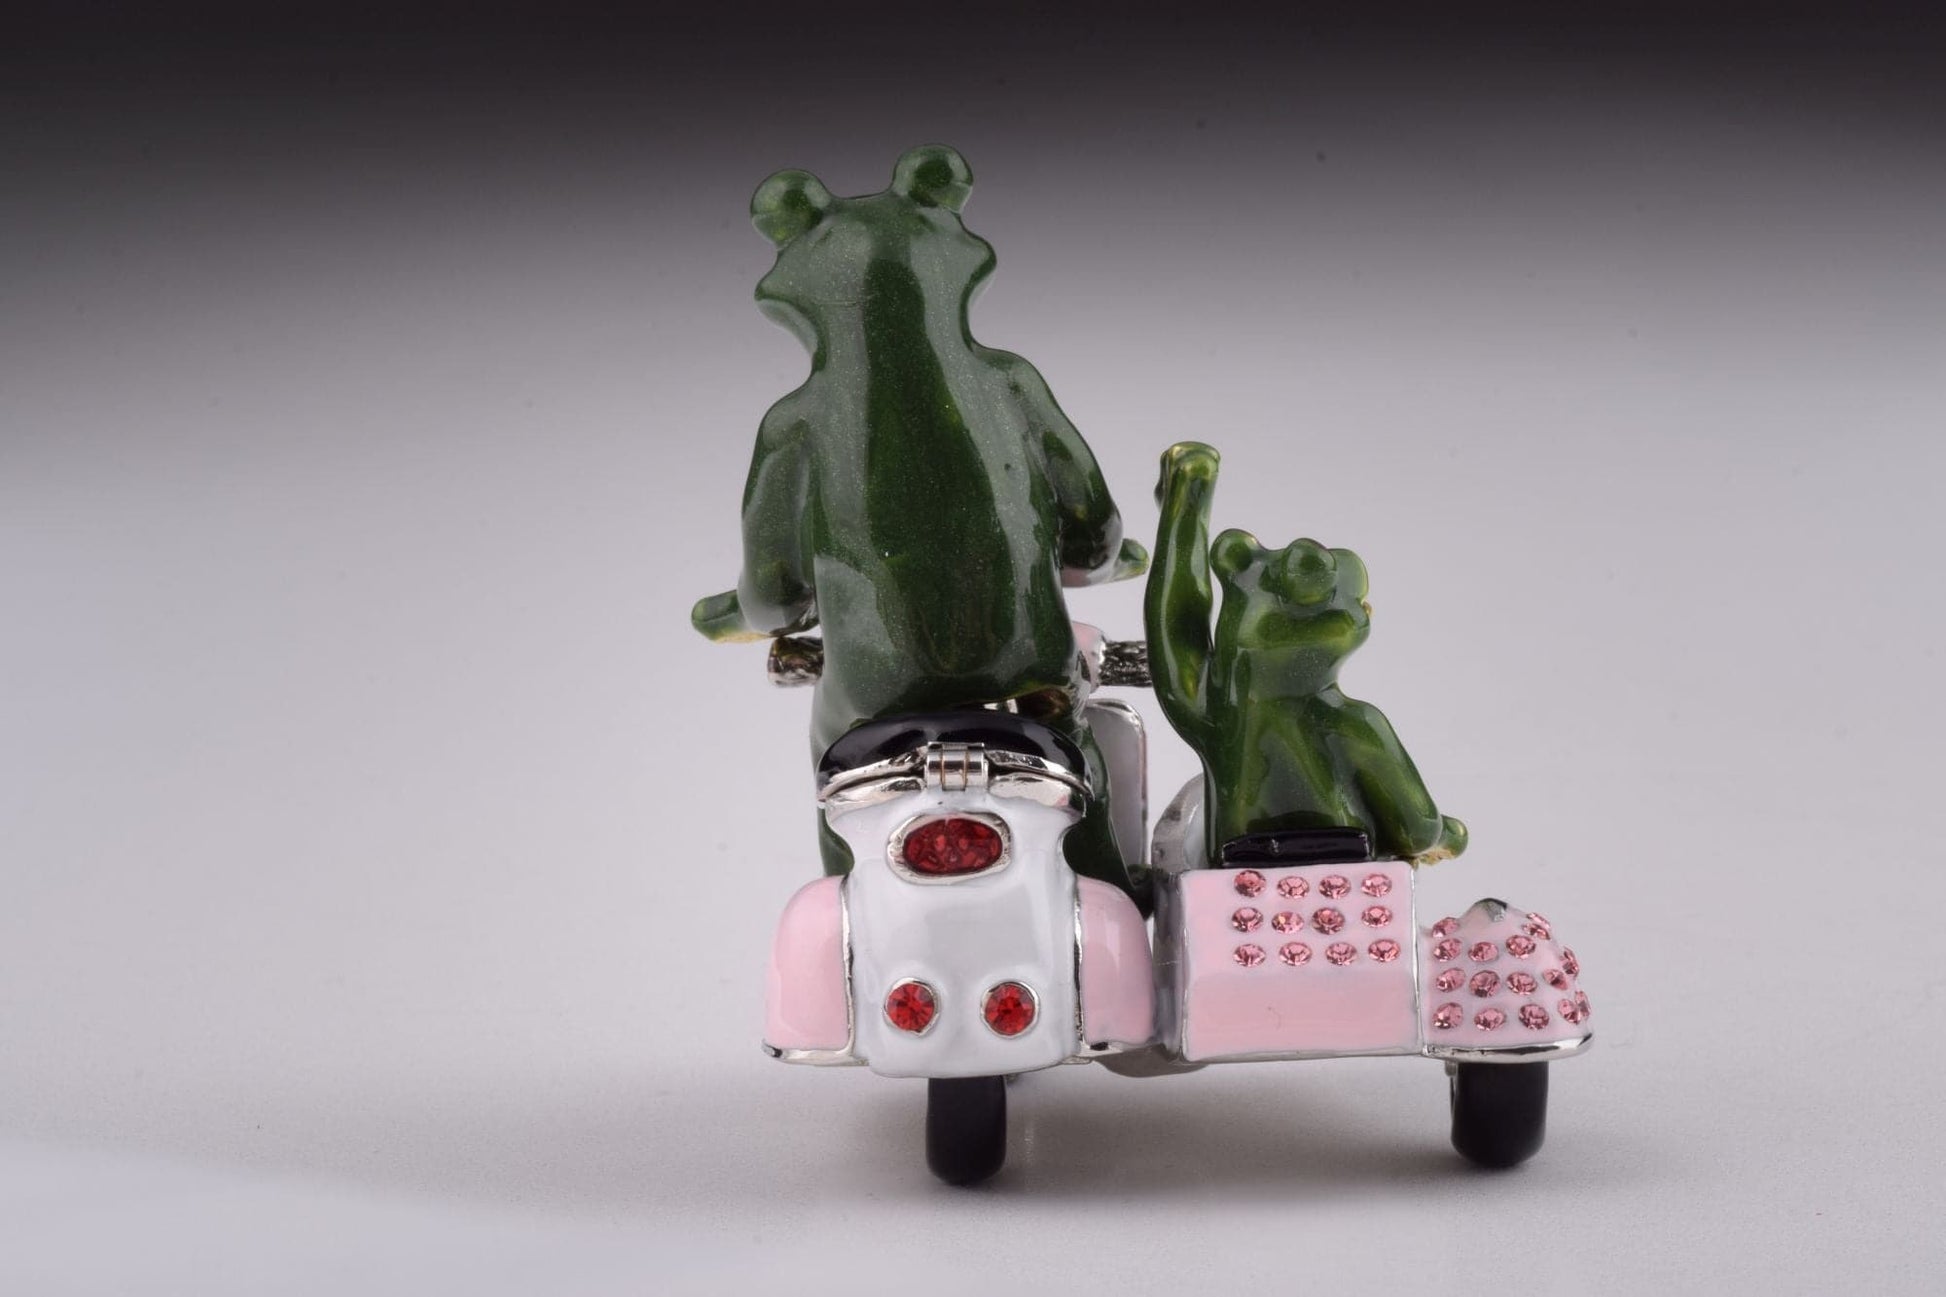 Frogs Riding Vespa with Sidecar - Treasures of my HeART